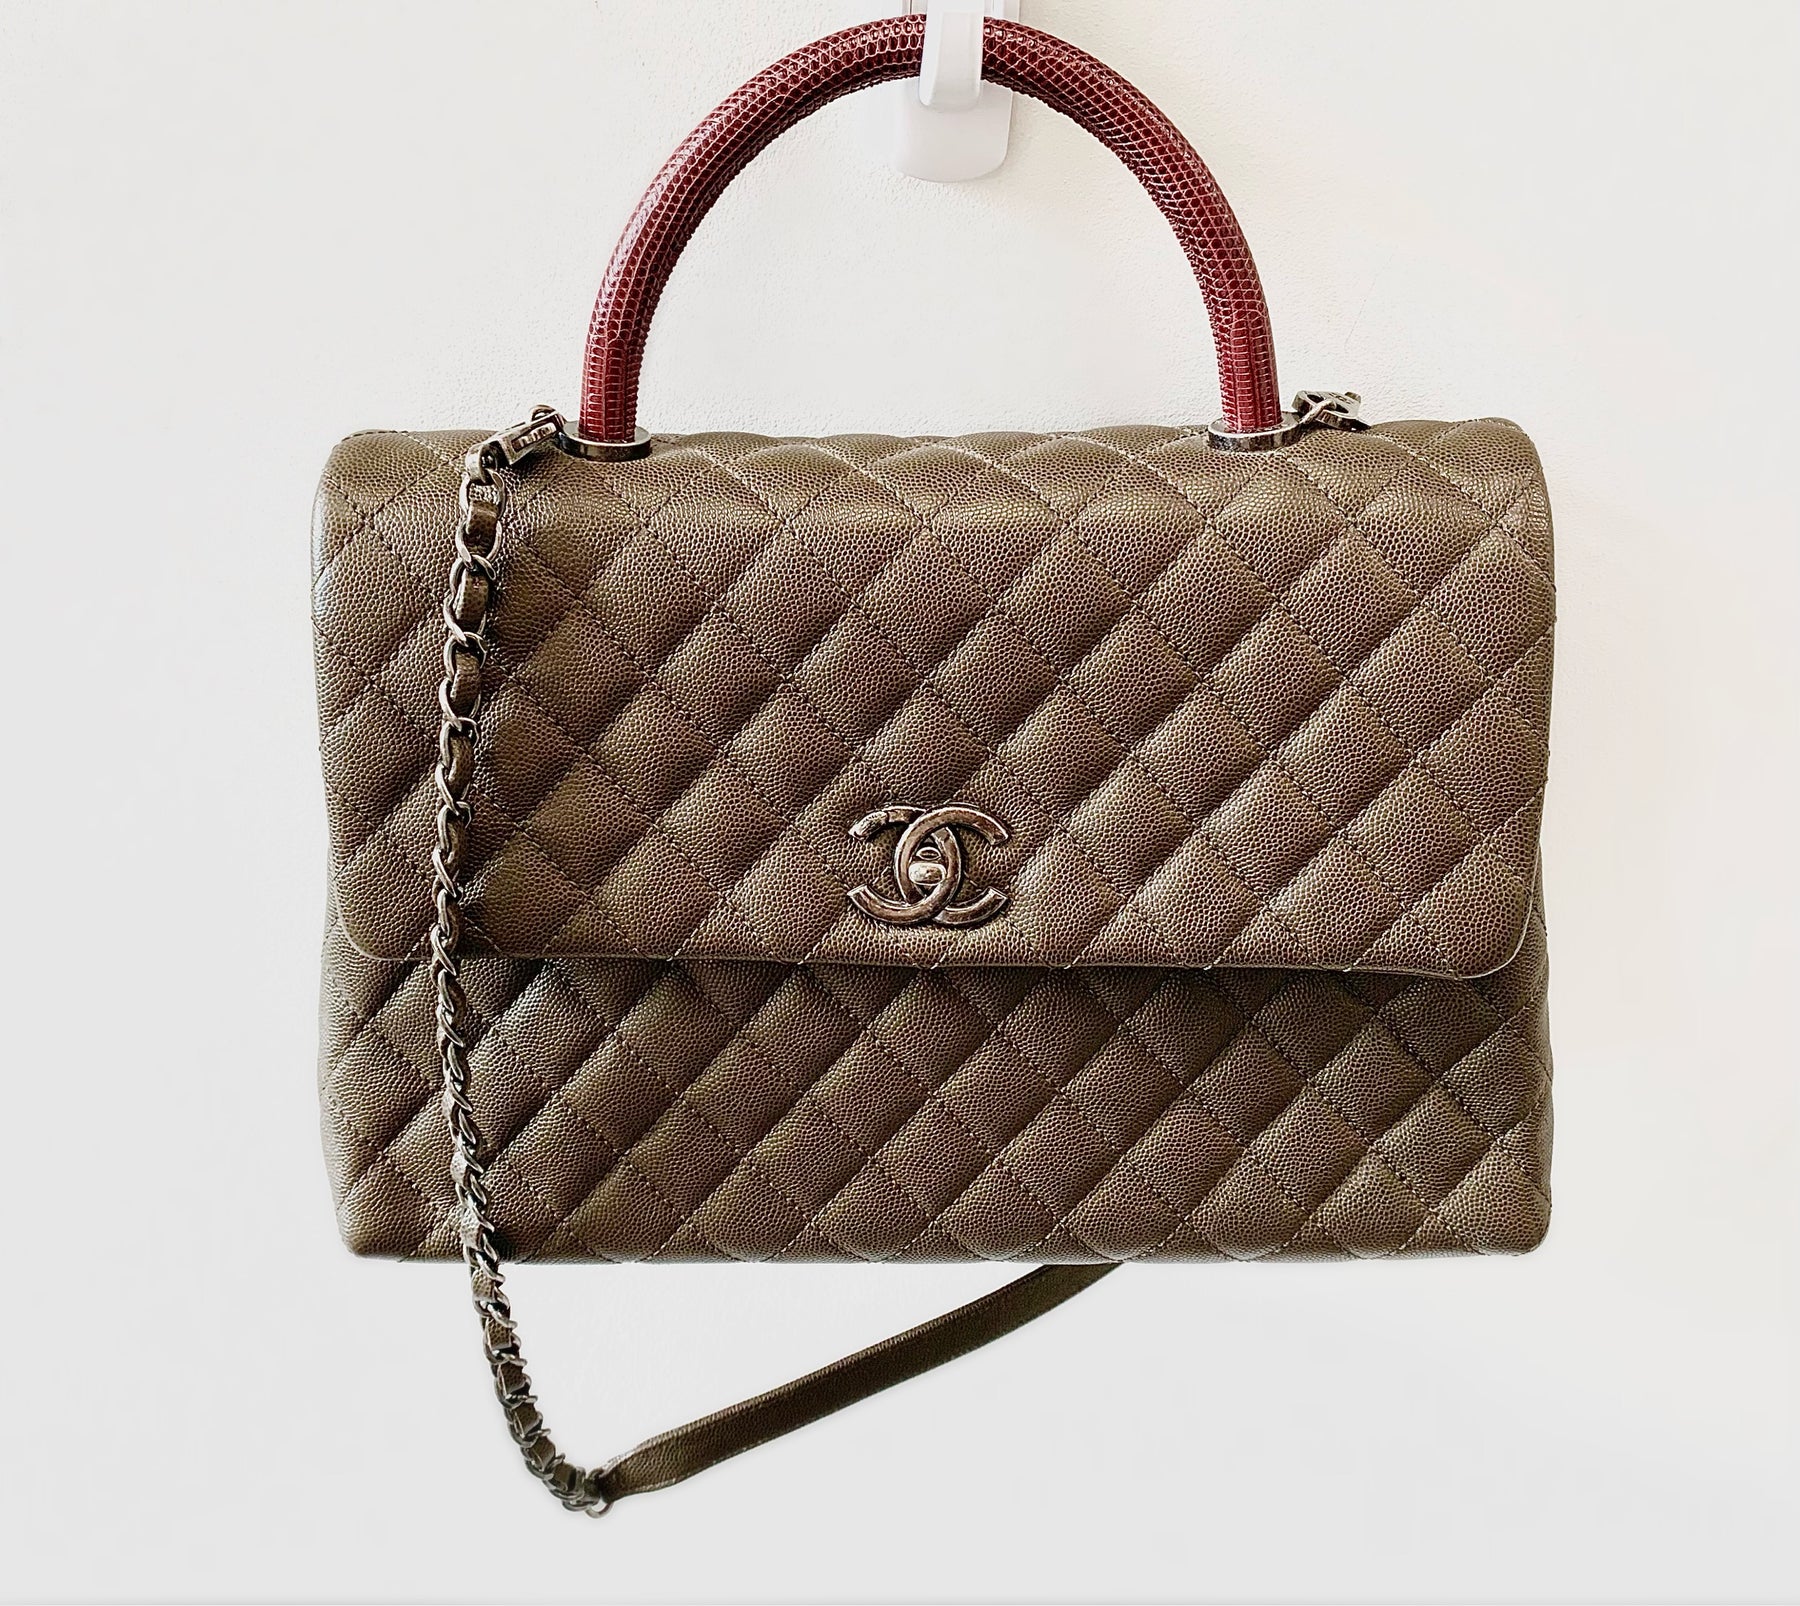 Chanel Shiva Bag Reference Guide - Spotted Fashion